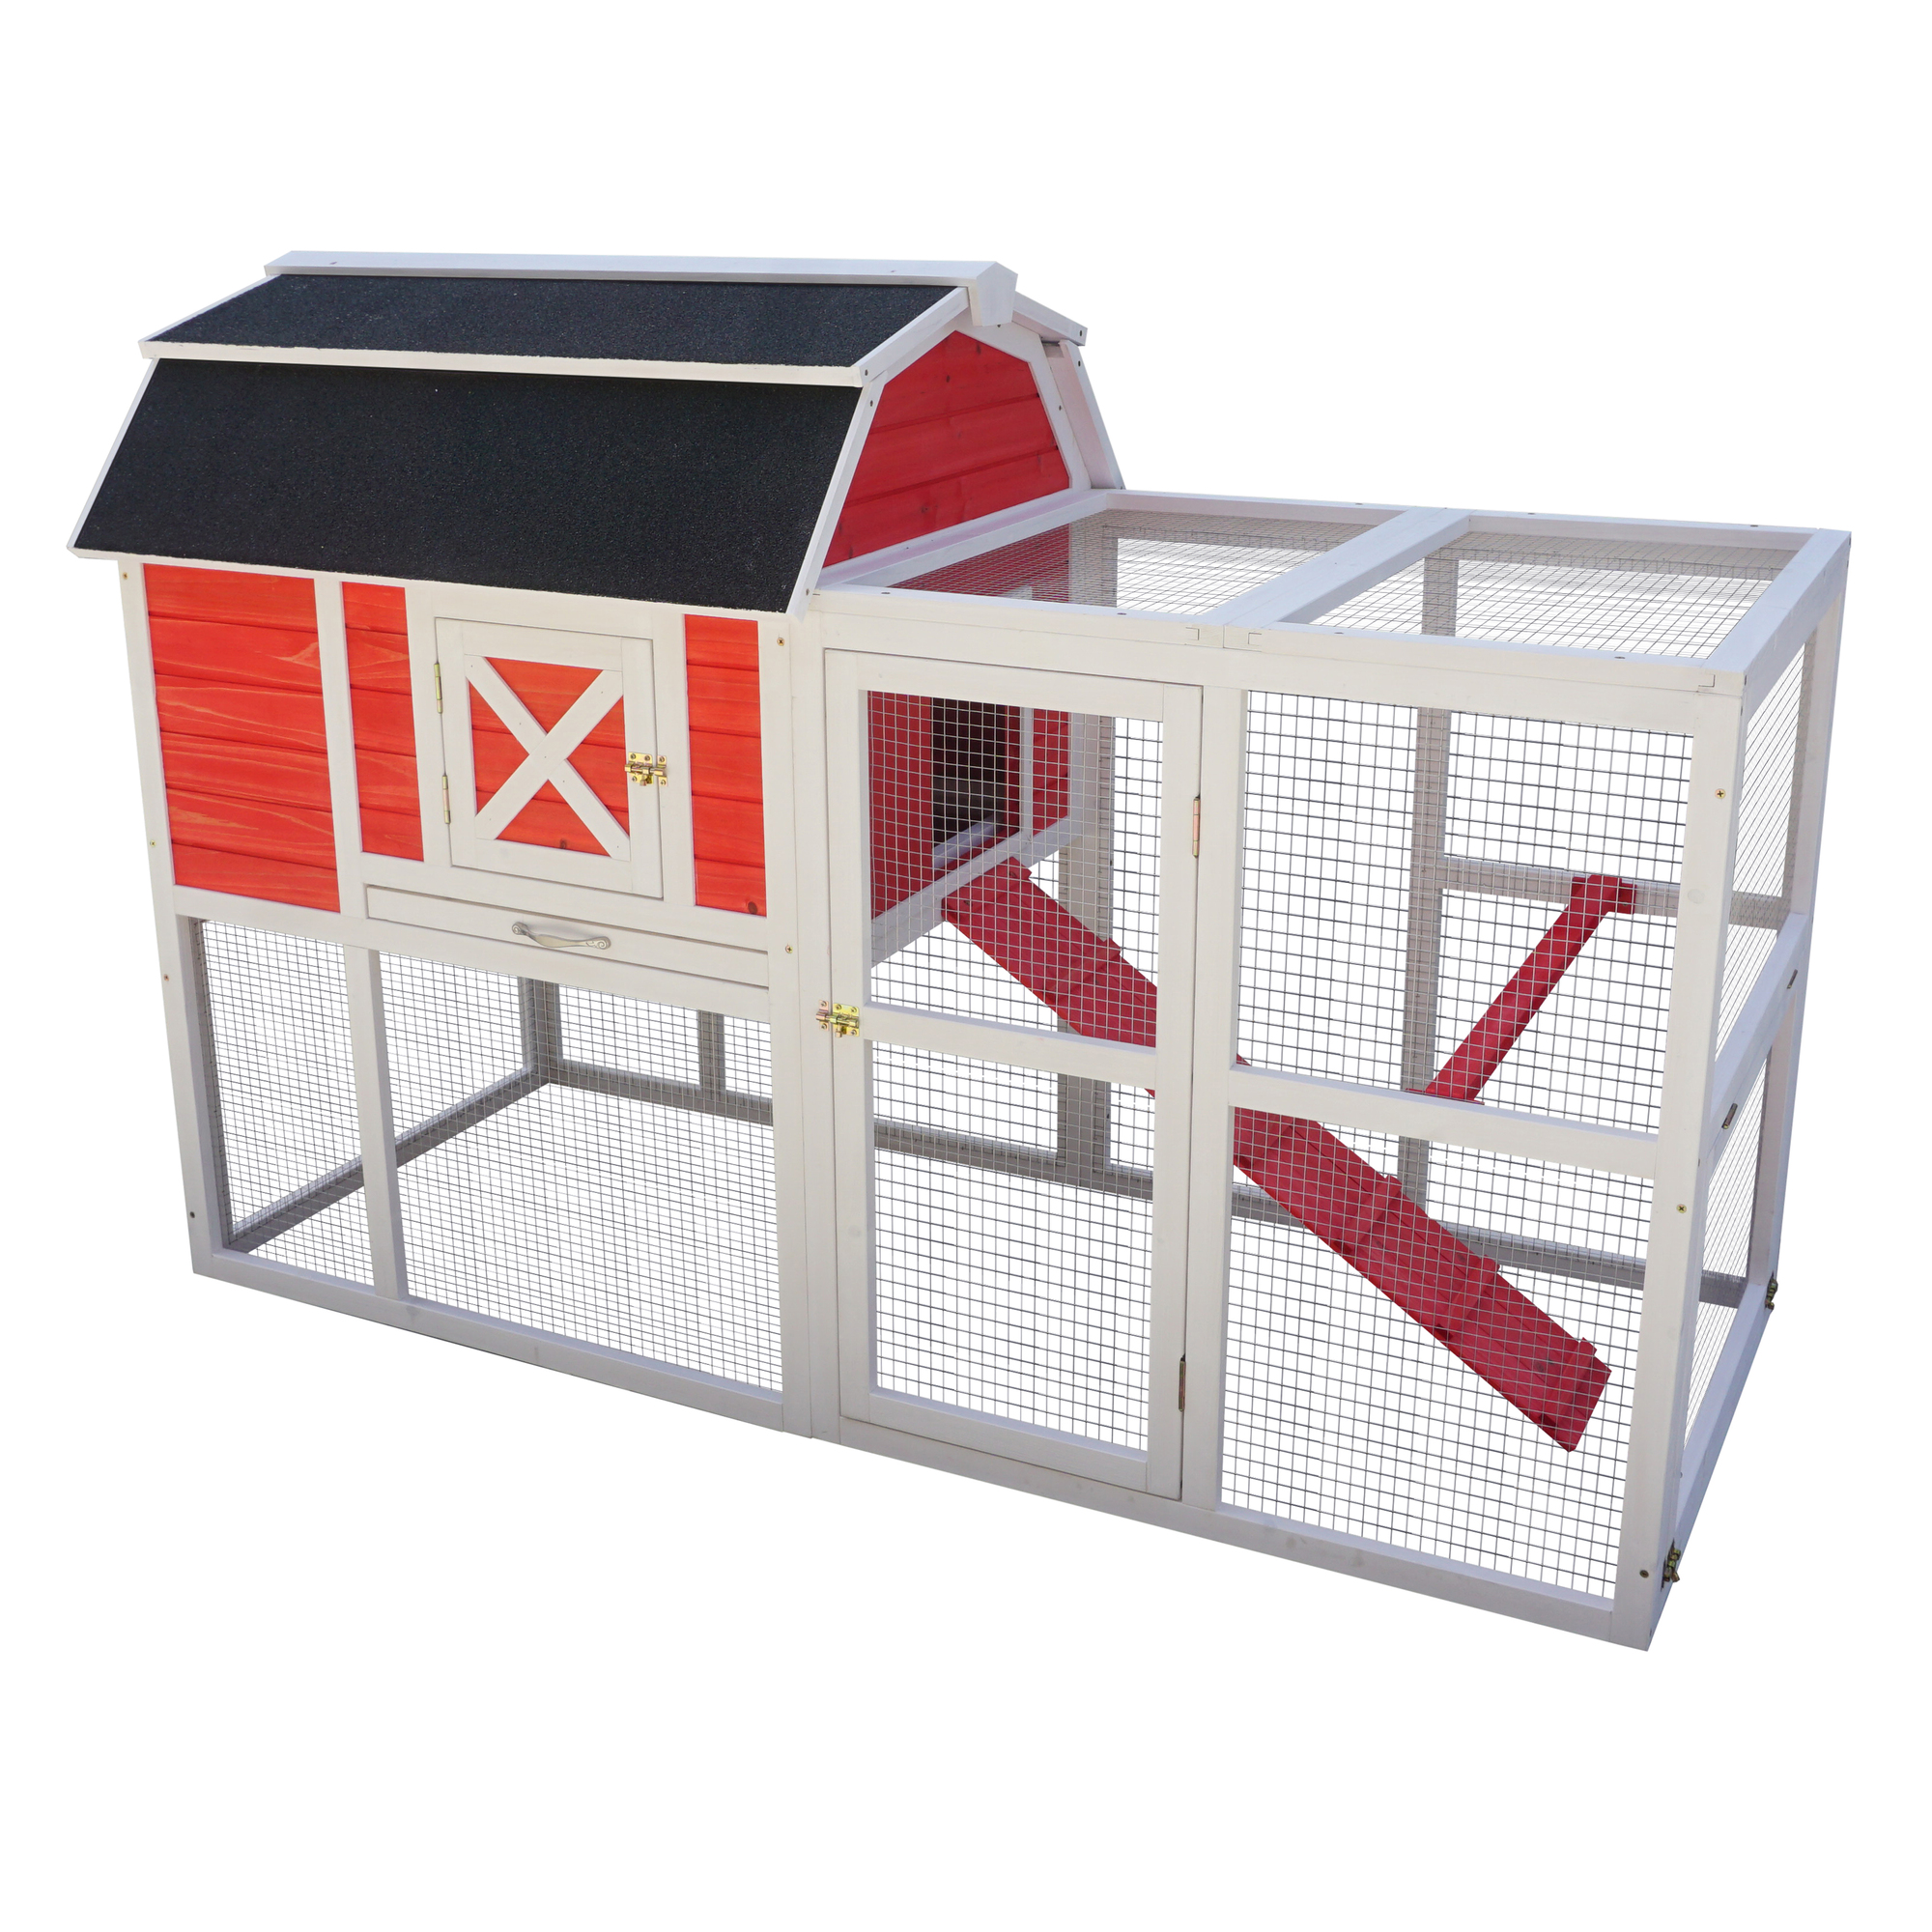 Merry Products, Big Farm Chicken Coop, Model PTH1220020612